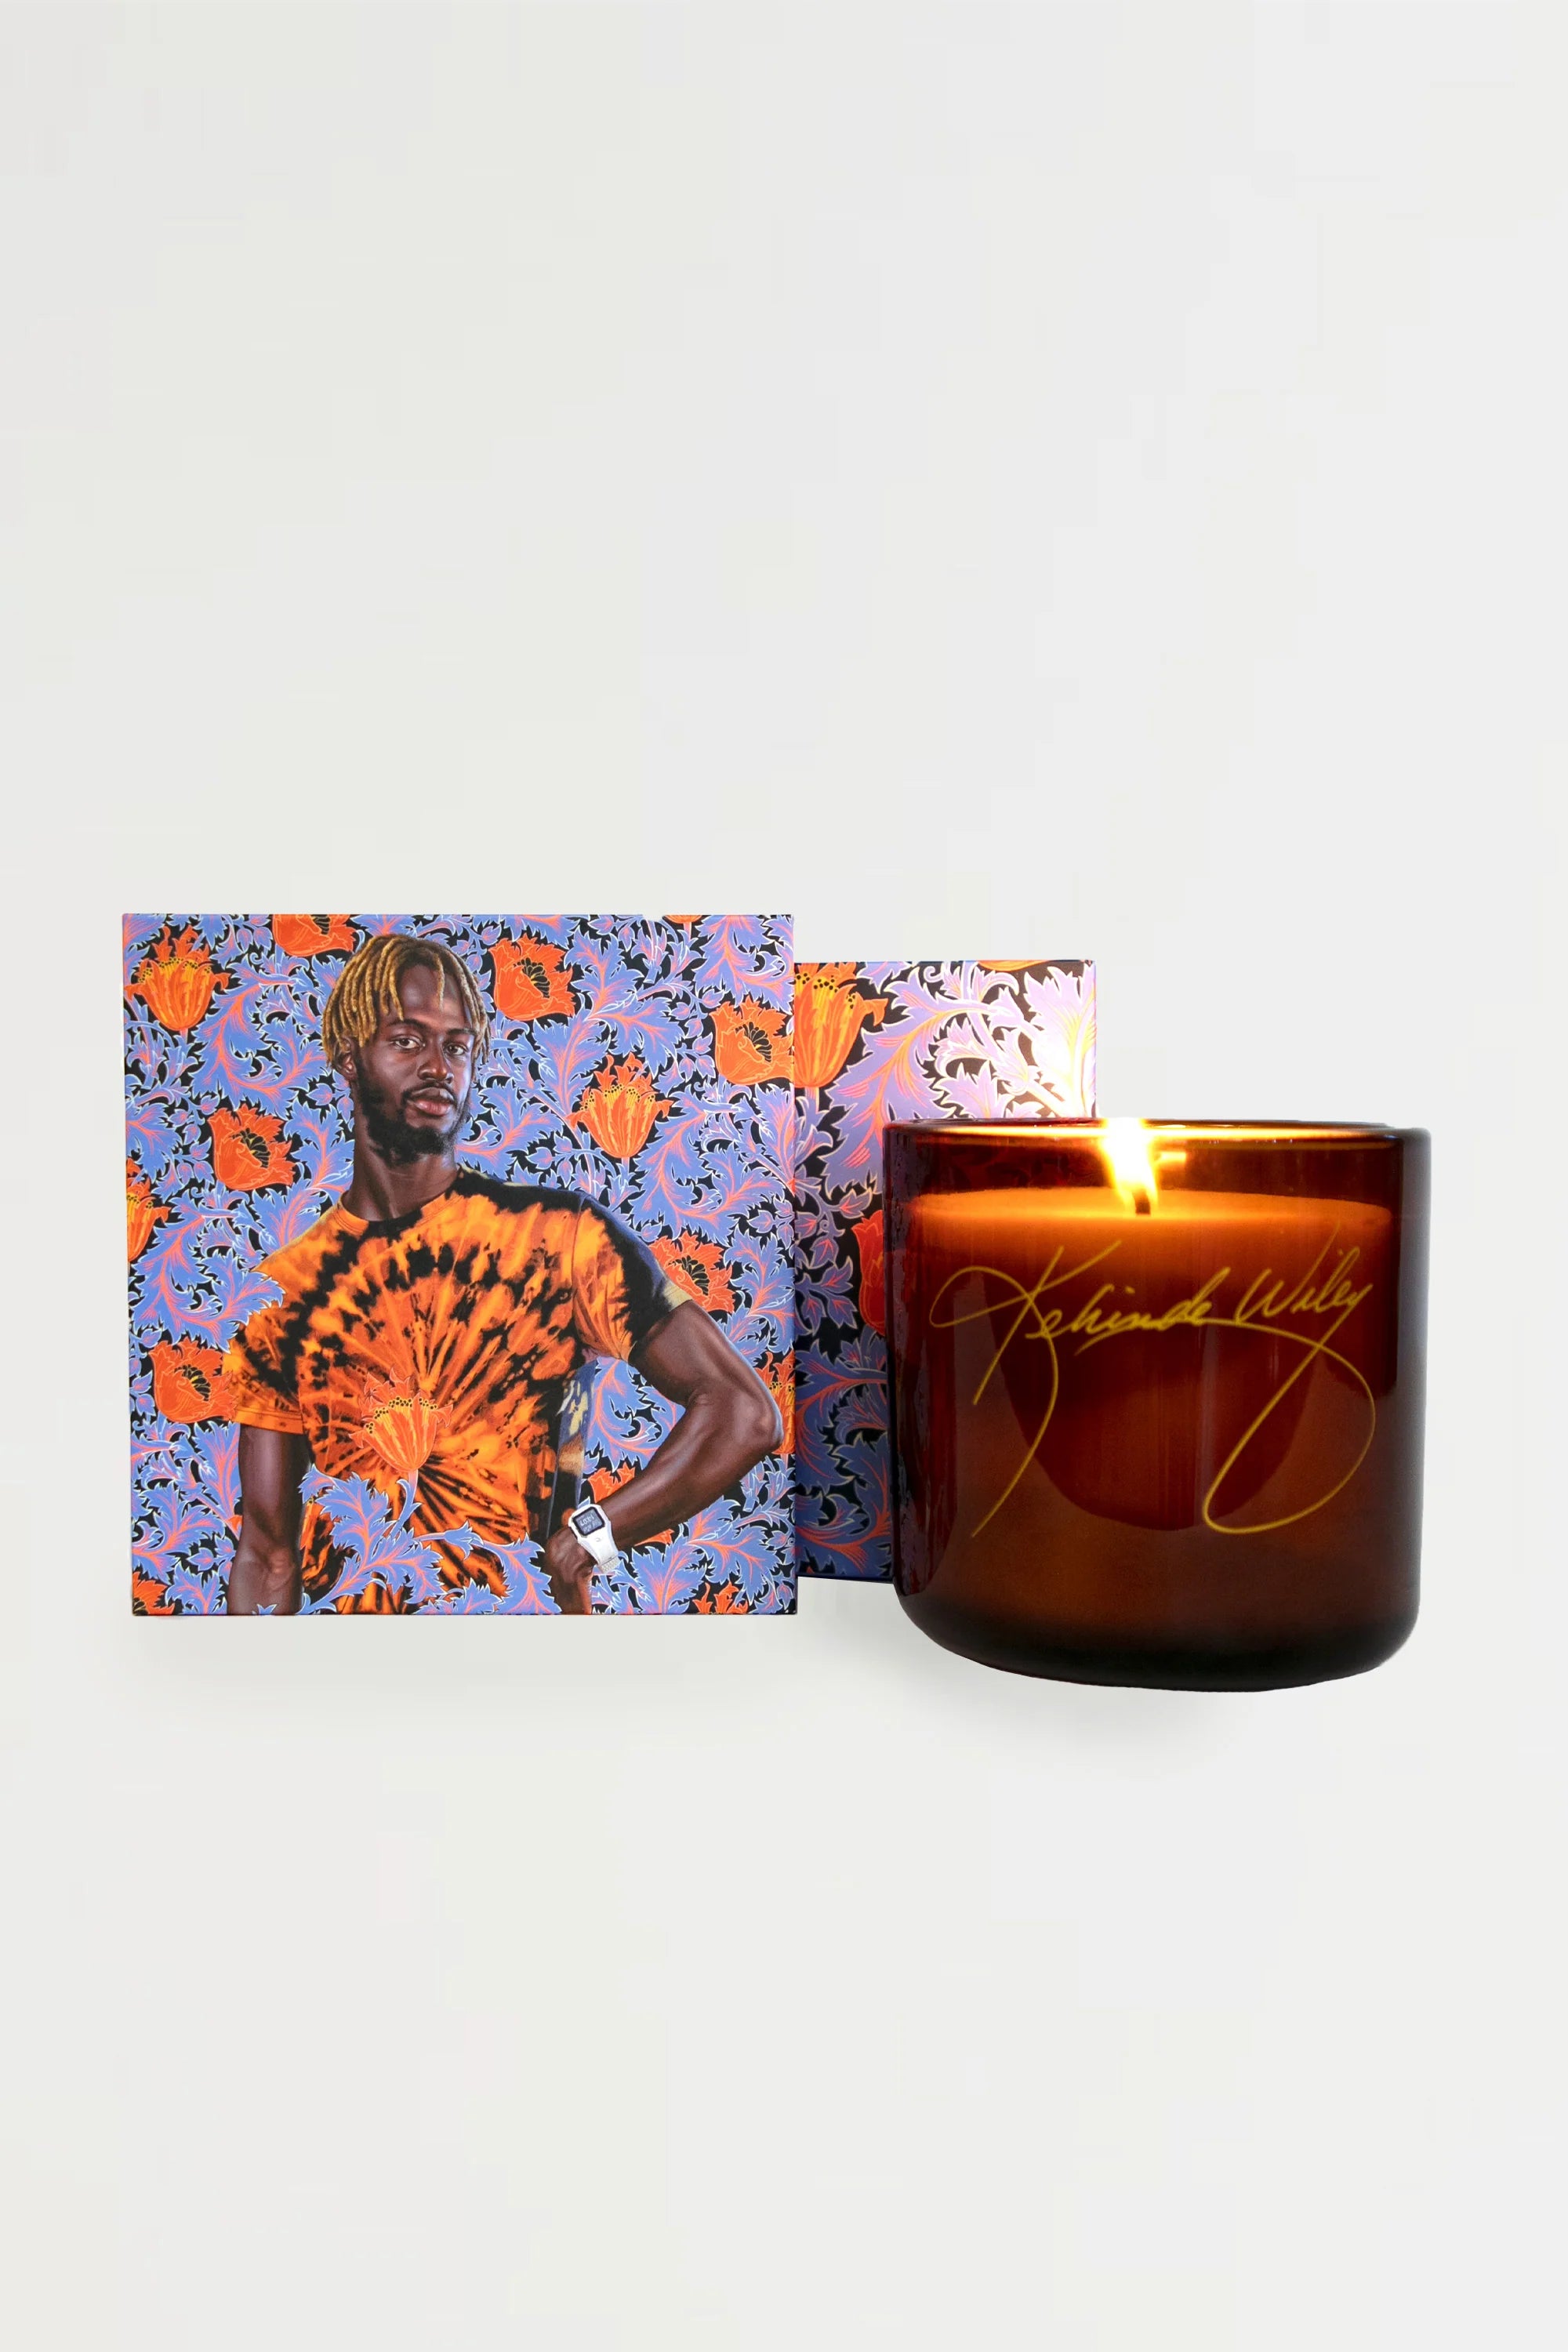 Kehinde Wiley Blue Boy Candle